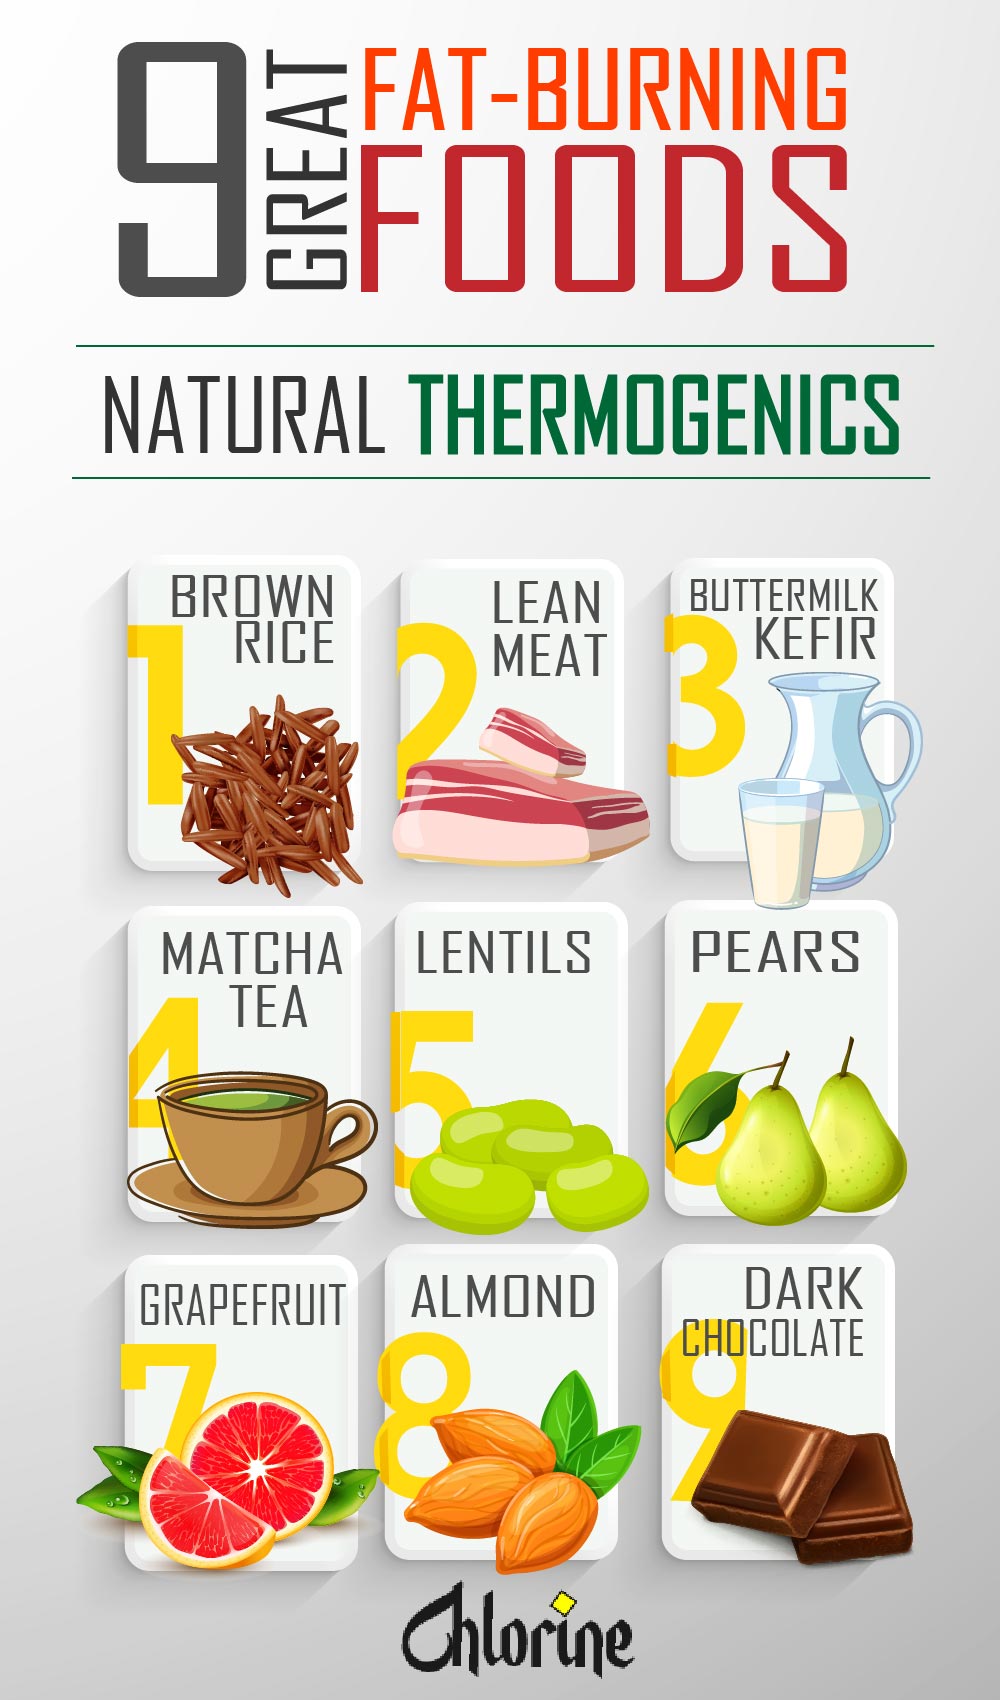 9 foods for weight loss thermogenics natural-01